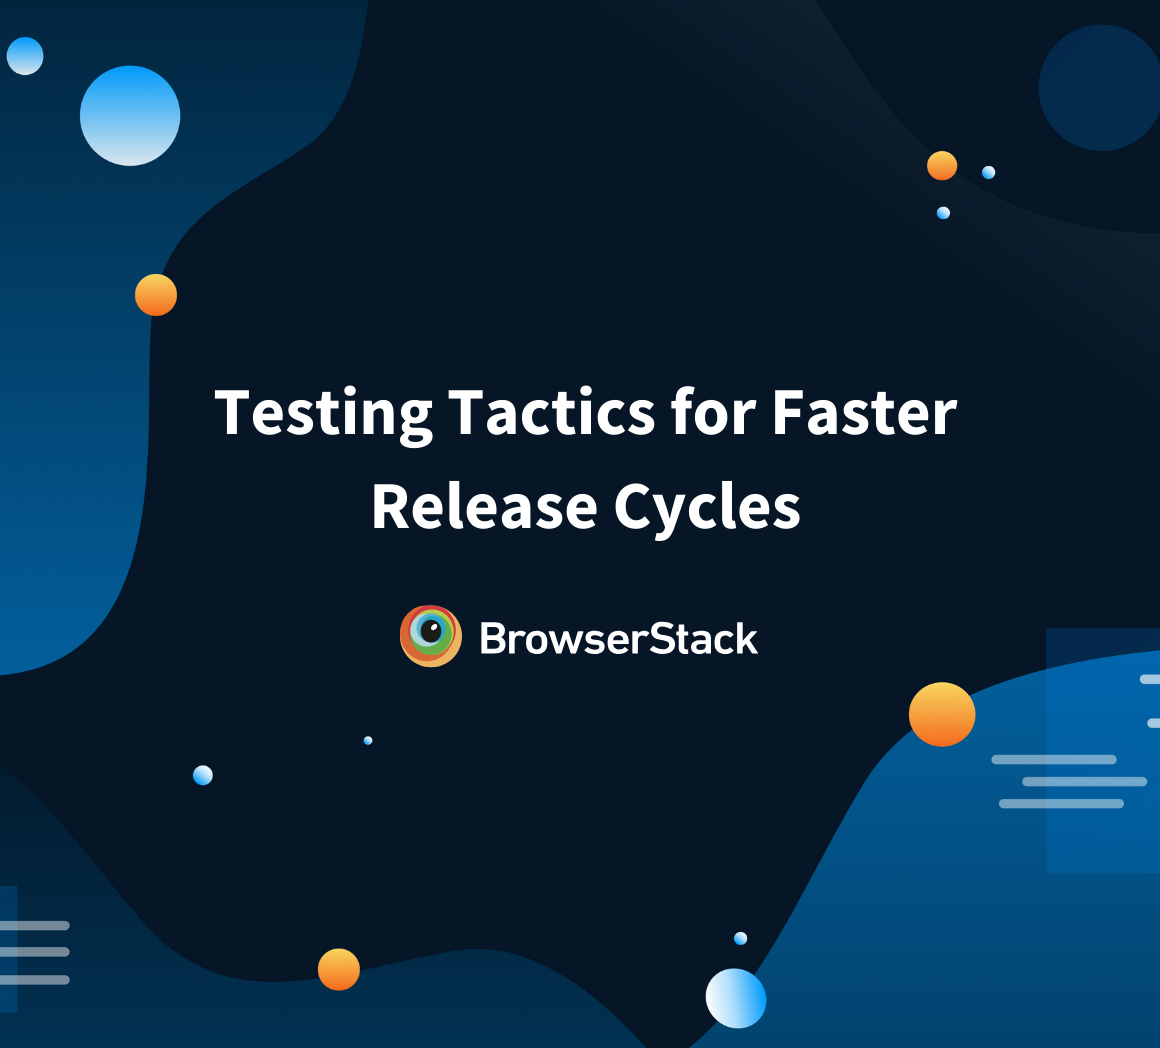 How to test for faster release cycles